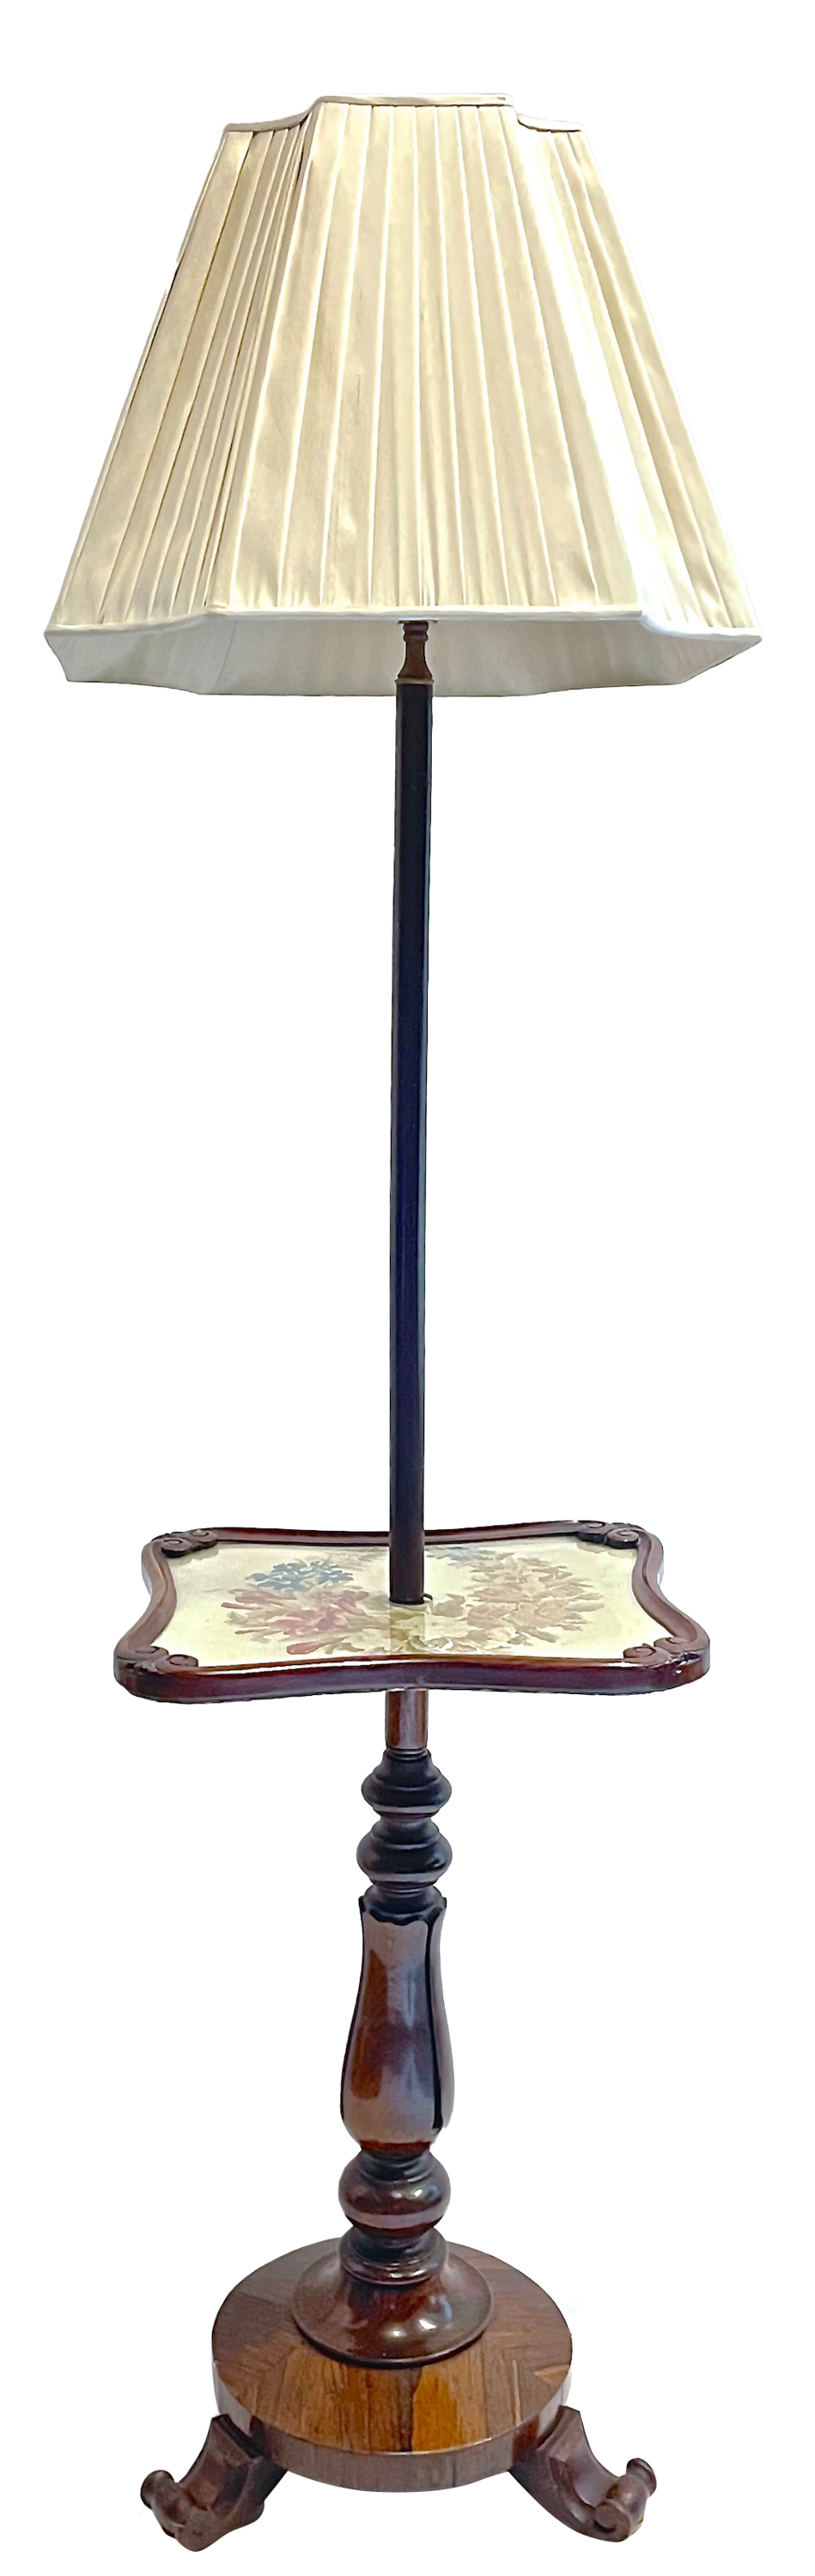 Floral Needlepoint Floor Lamp with Table~P77625000